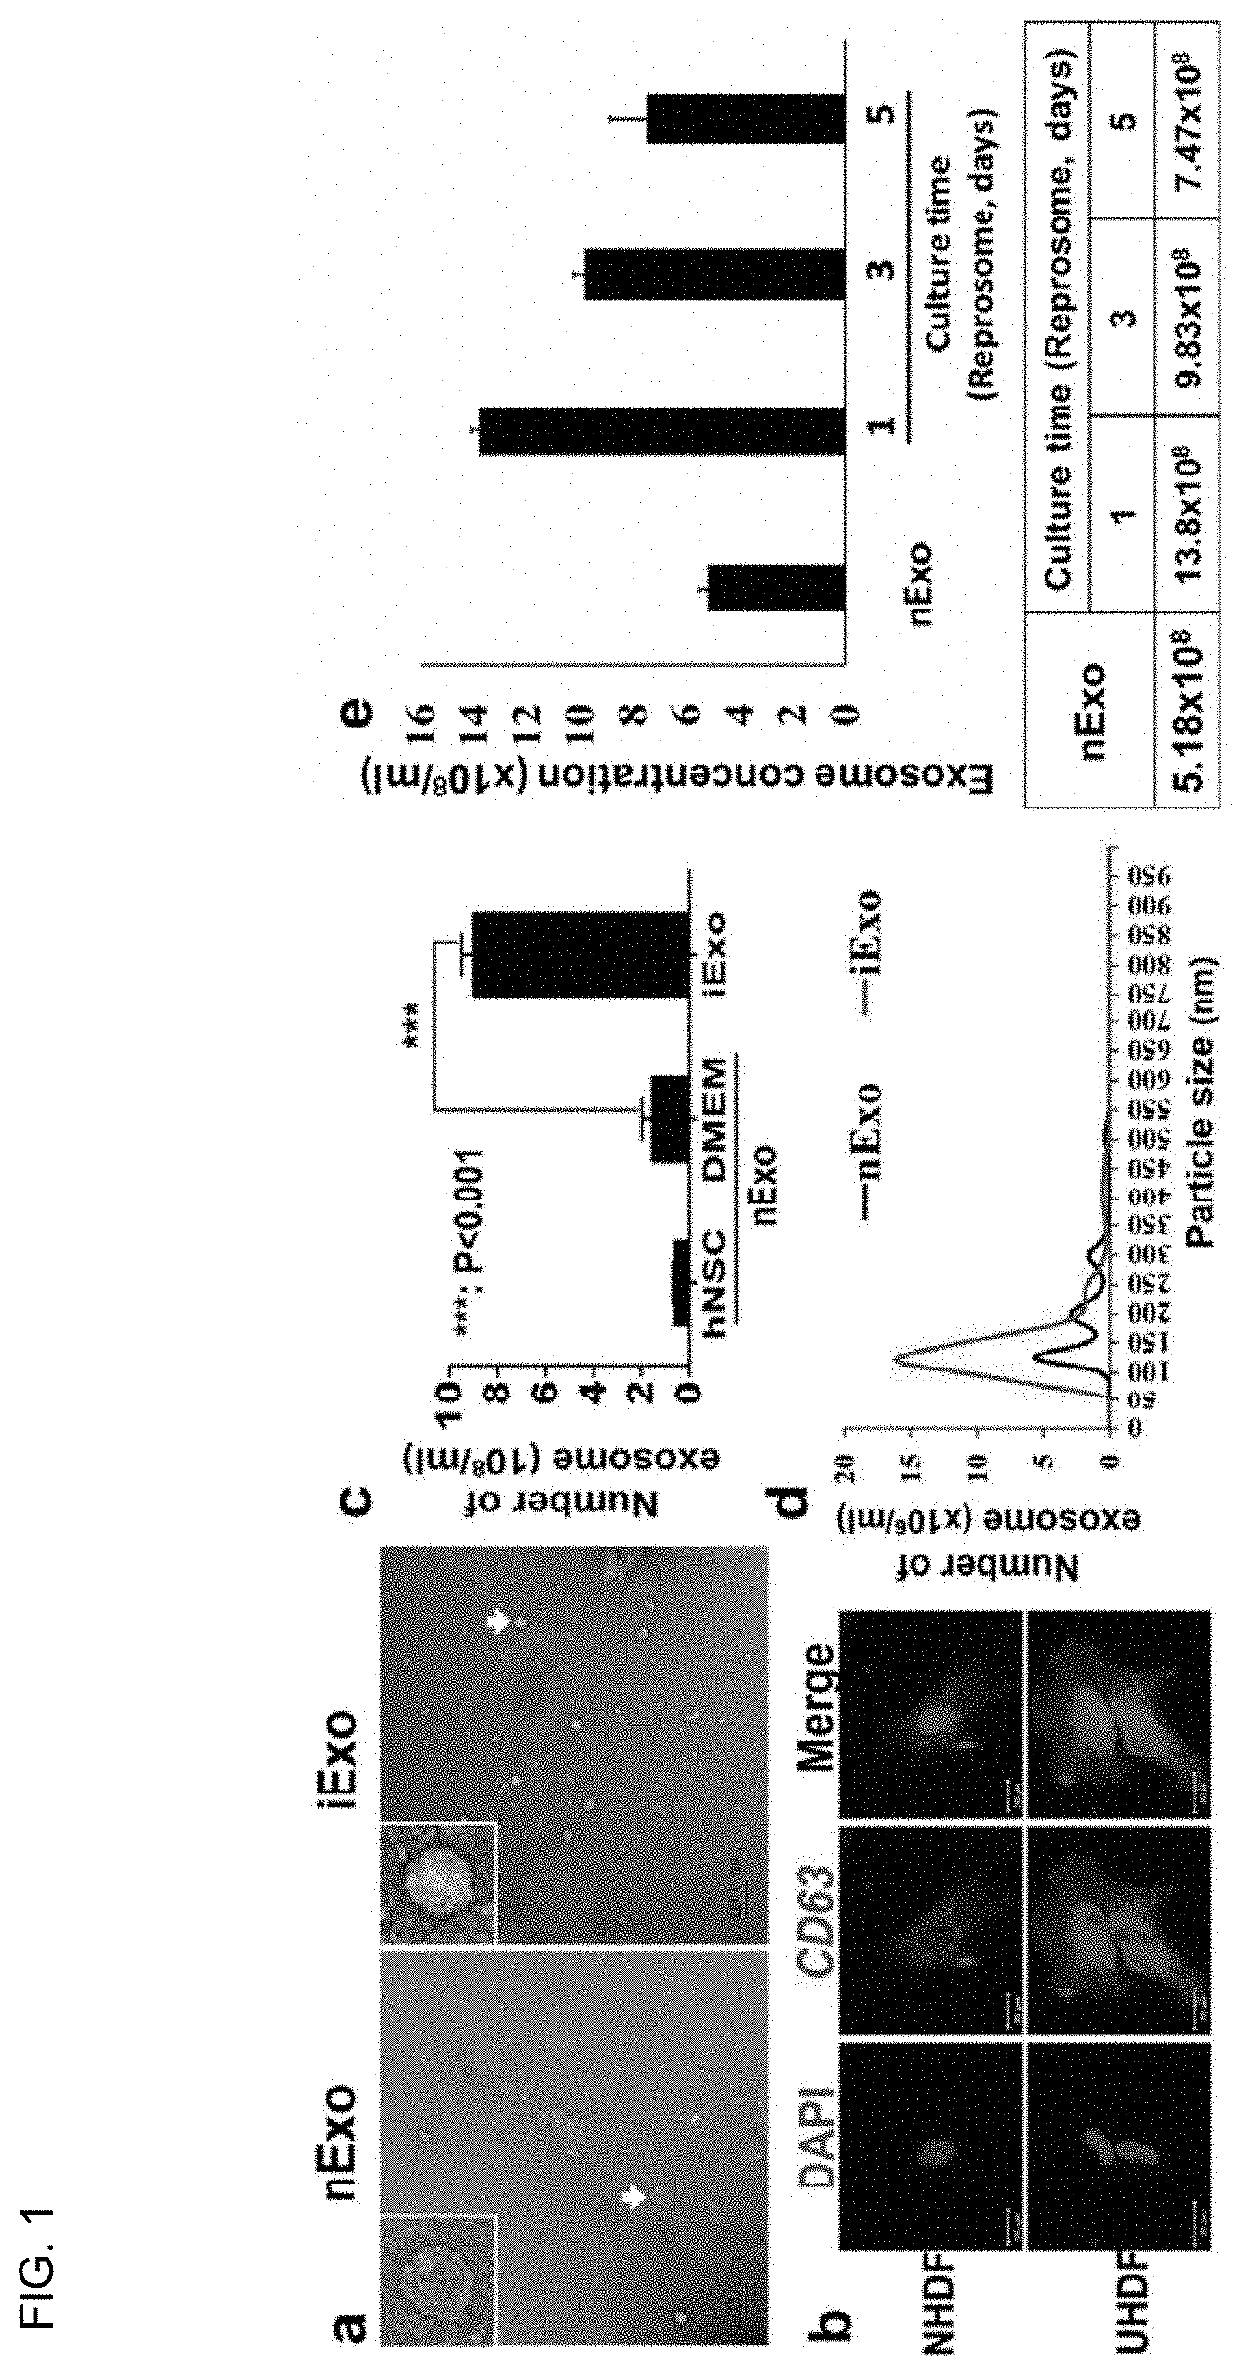 Reprosomes, as exosomes capable of inducing reprogramming of cells and preparation method thereof